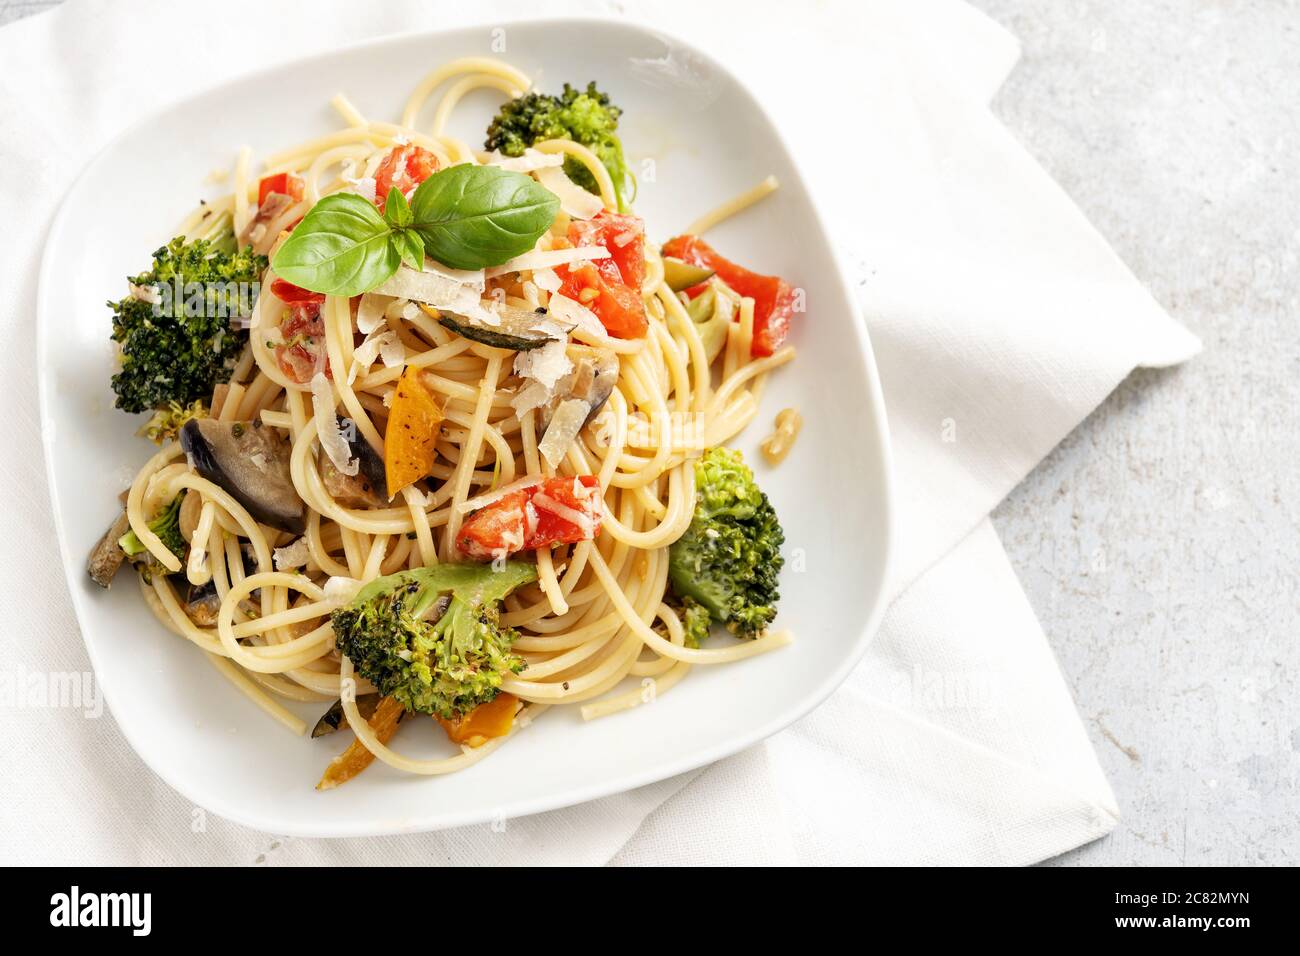 Vegetarian spaghetti with broccoli, tomatoes, bell pepper and eggplant, healthy Mediterranean pasta meal on a white plate and a light gray background, Stock Photo